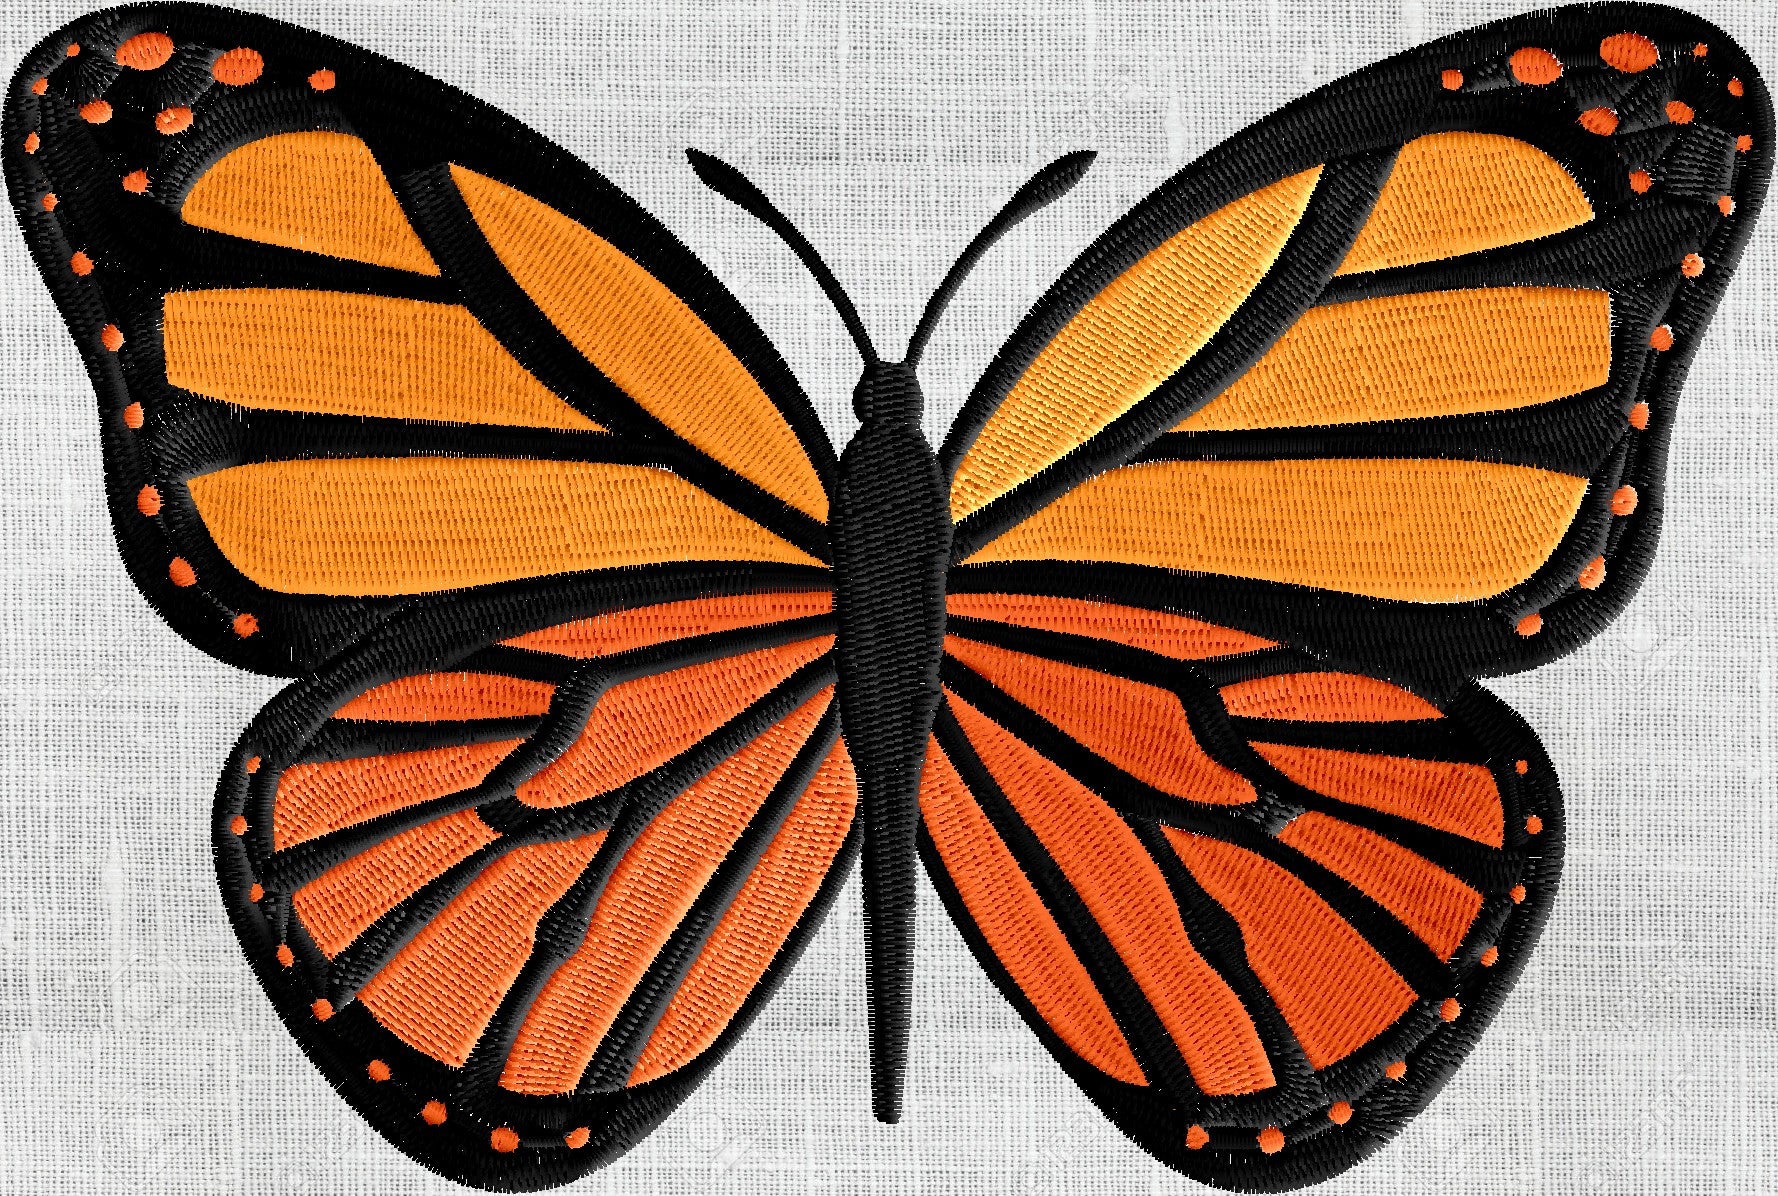 Monarch Butterfly - EMBROIDERY DESIGN file - Instant download Exp Jef Vp3 Pes Dst Hus formats - 2 sizes & 3 colors